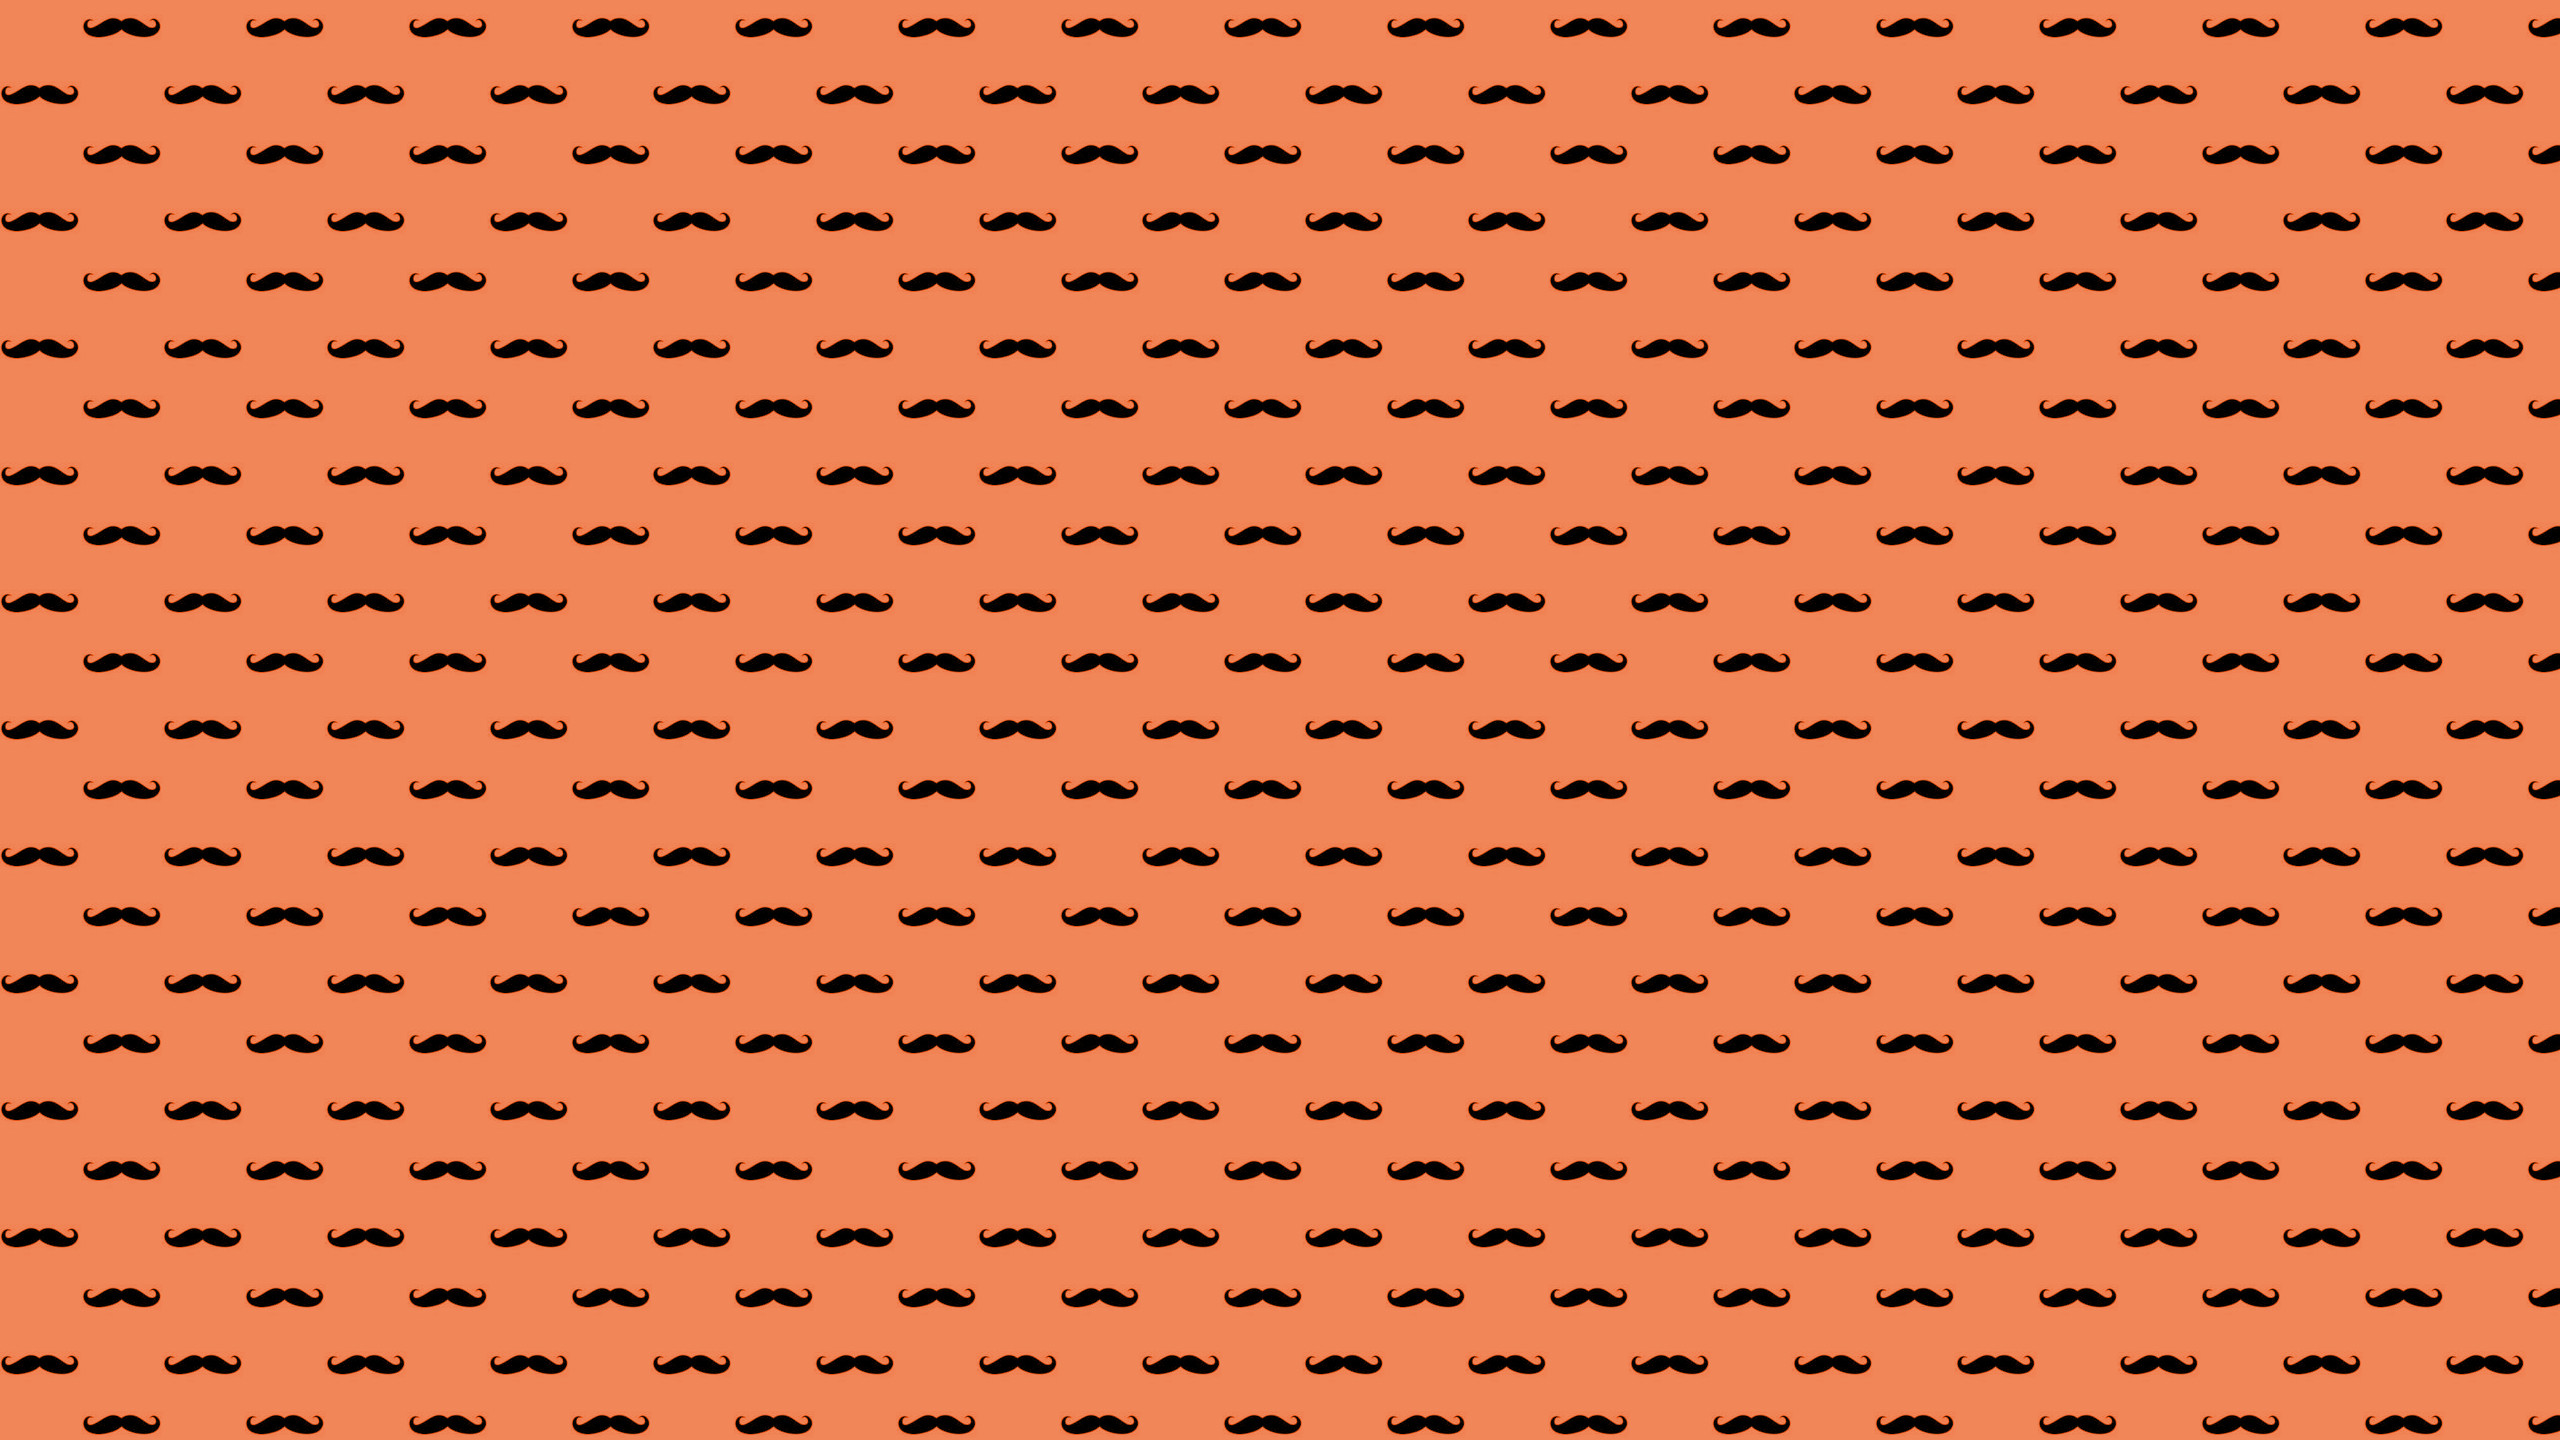 2560x1440 this Moustache Desktop Wallpaper is easy. Just save the wallpaper .